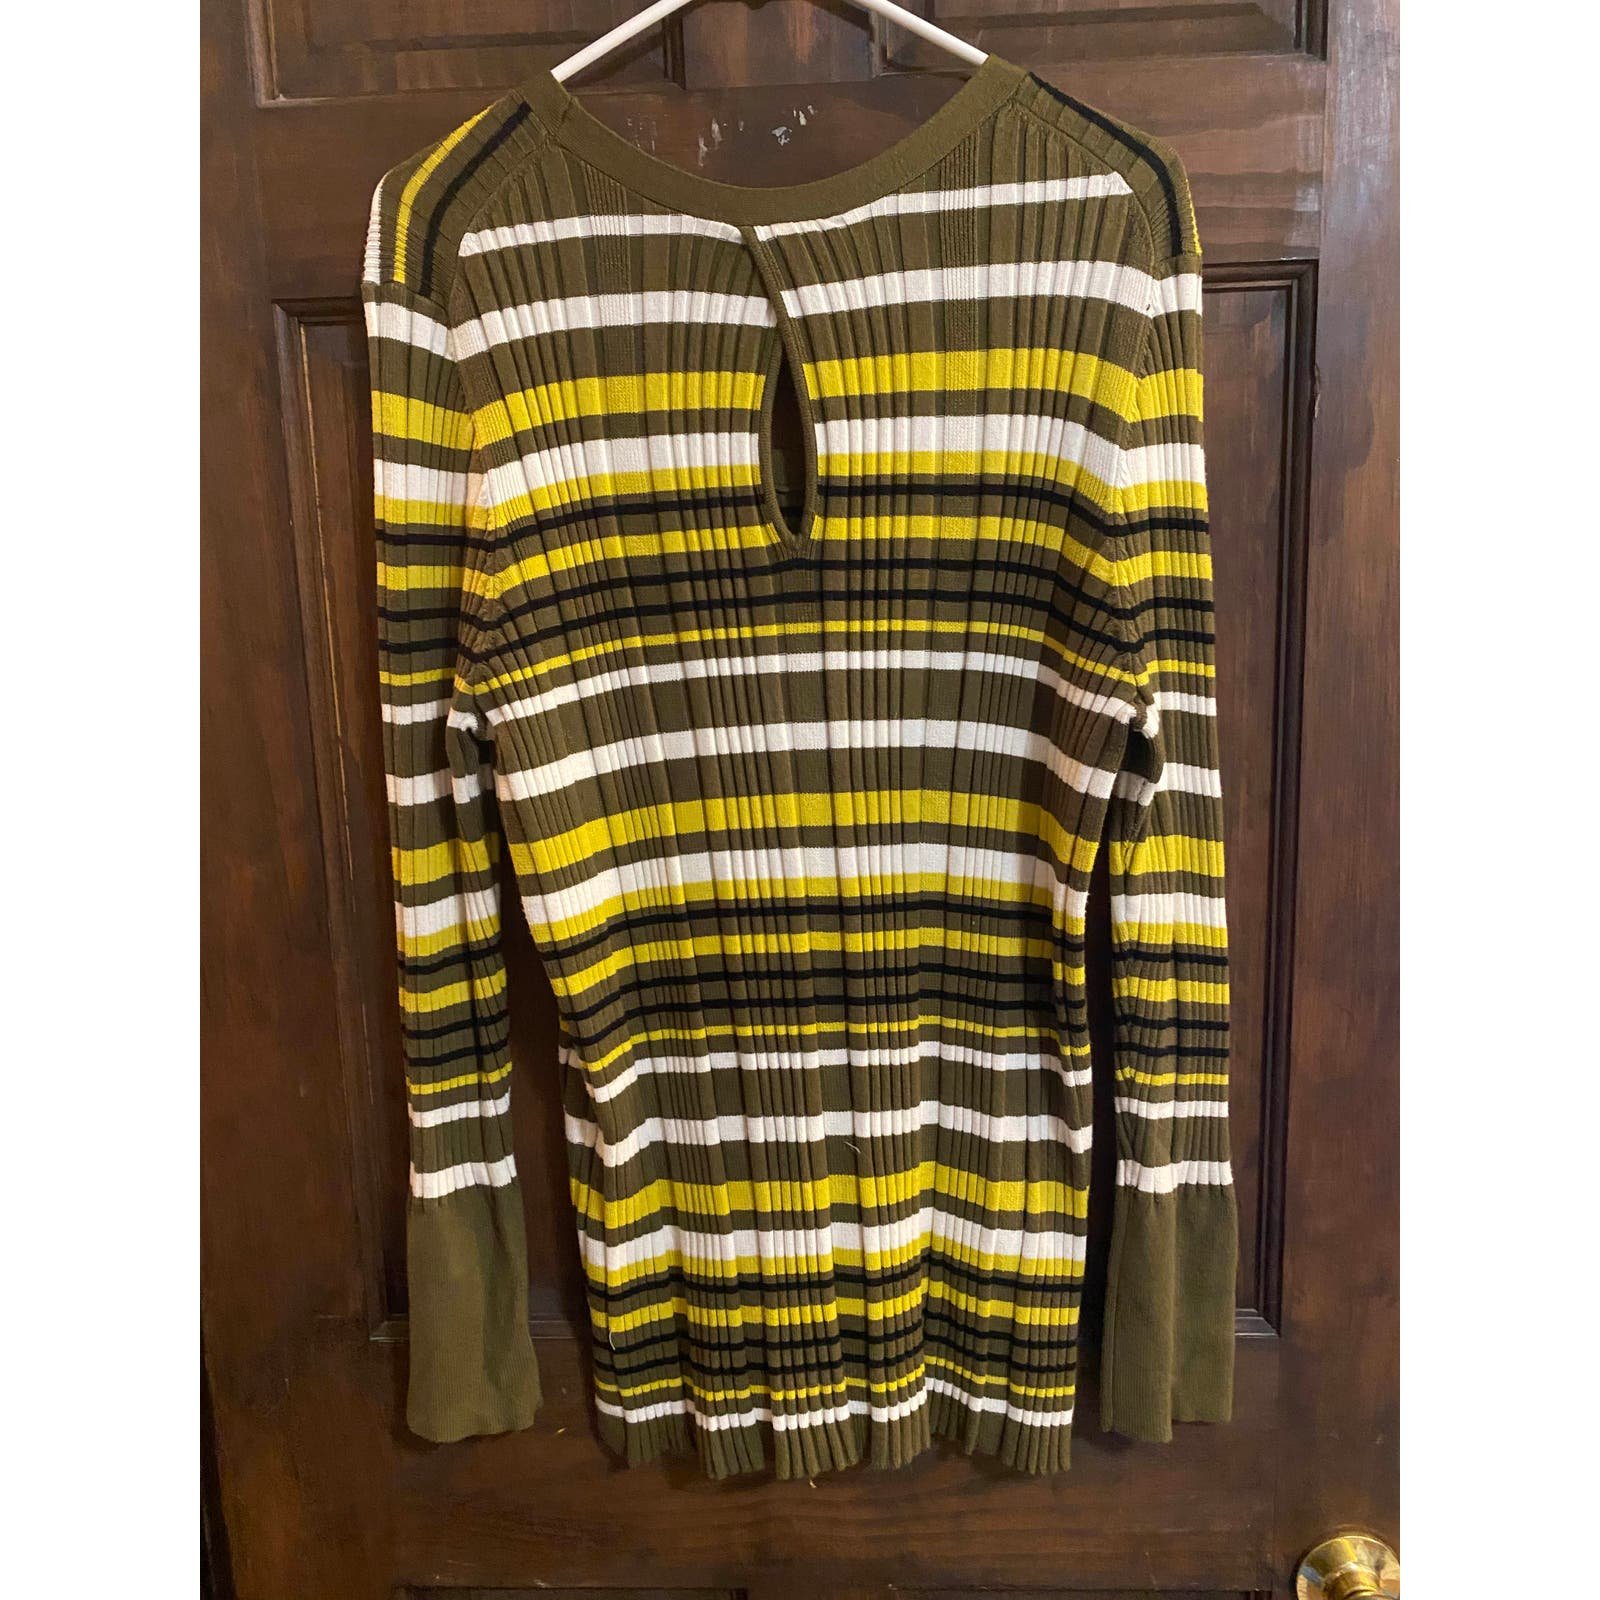 high discount Lane Bryant 22/24 Green Striped Ribbed Long Sleeve Top jdHPDs7hu outlet online shop